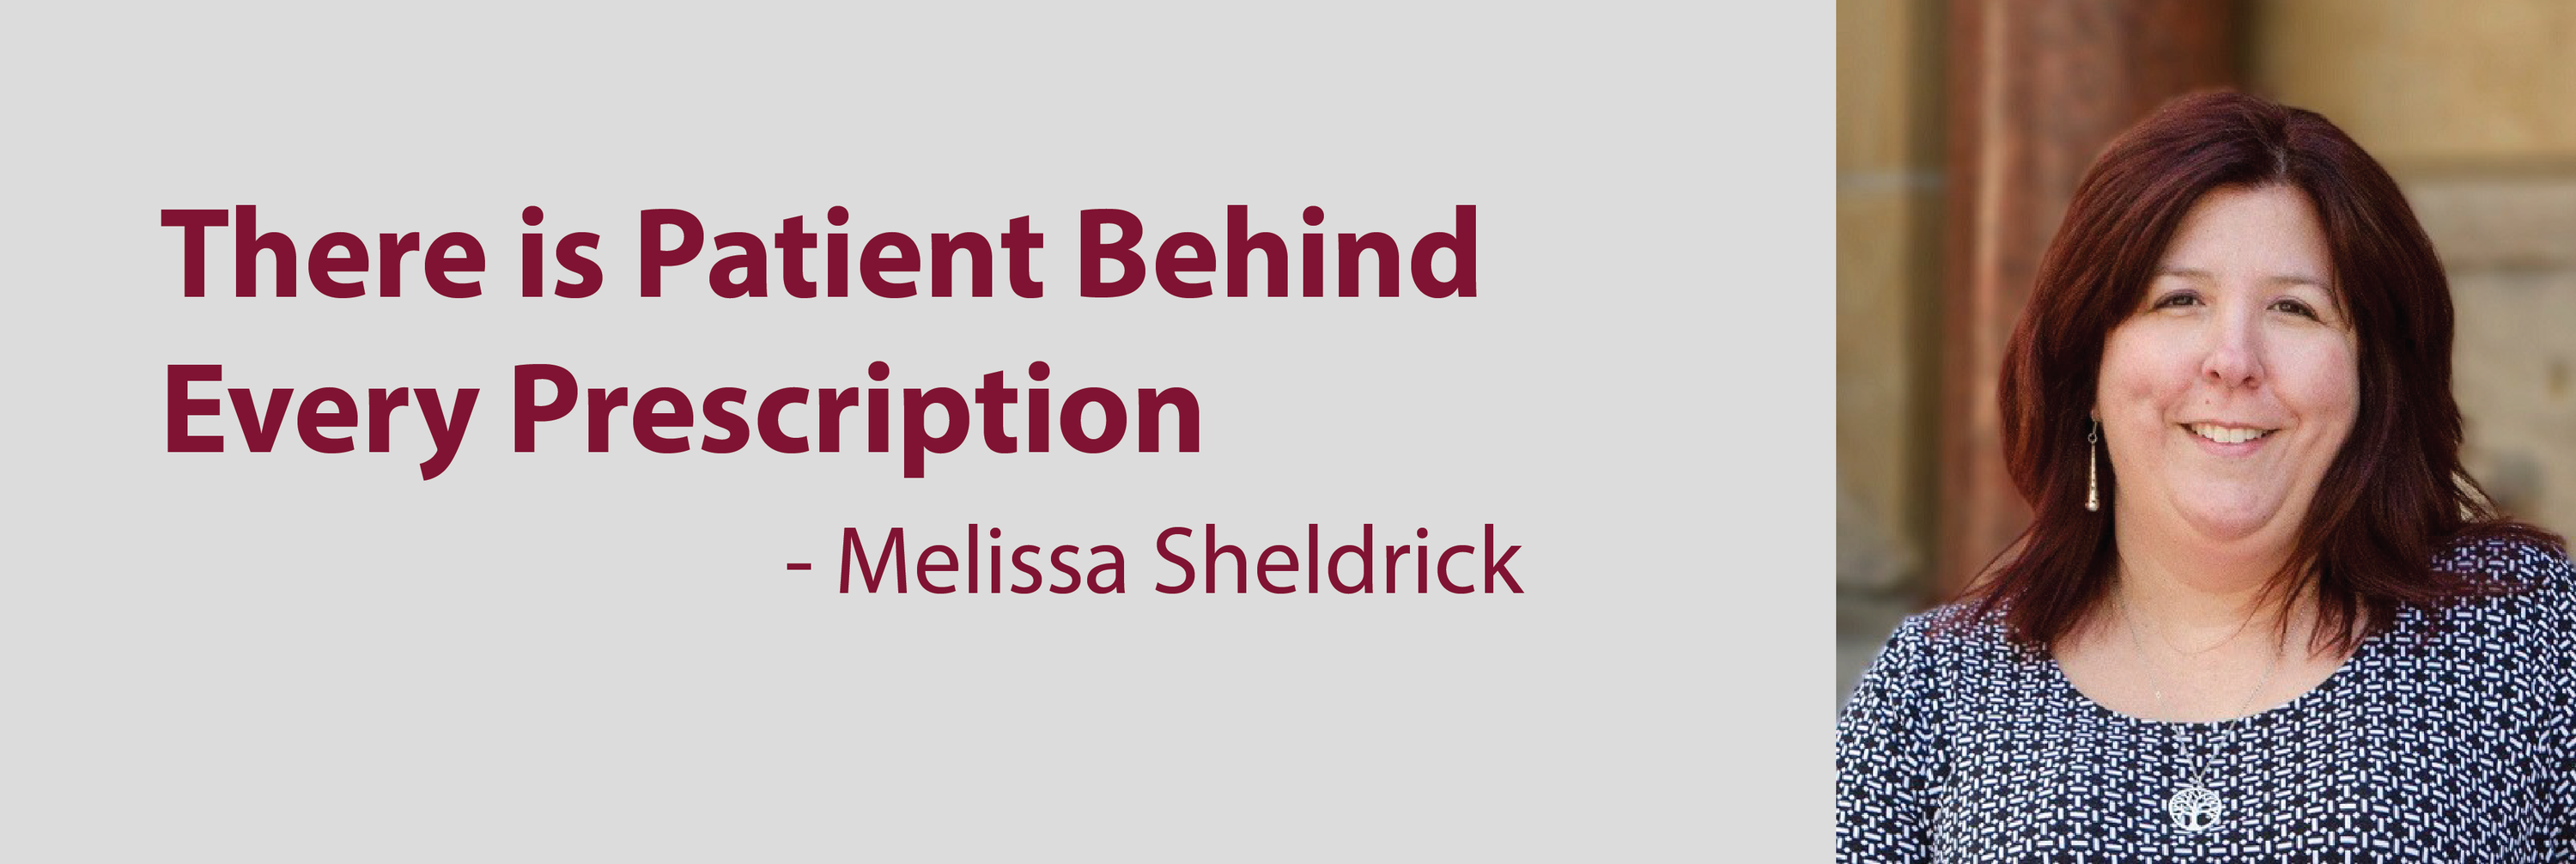 There is a patient behind every prescription. Melissa Sheldrick.